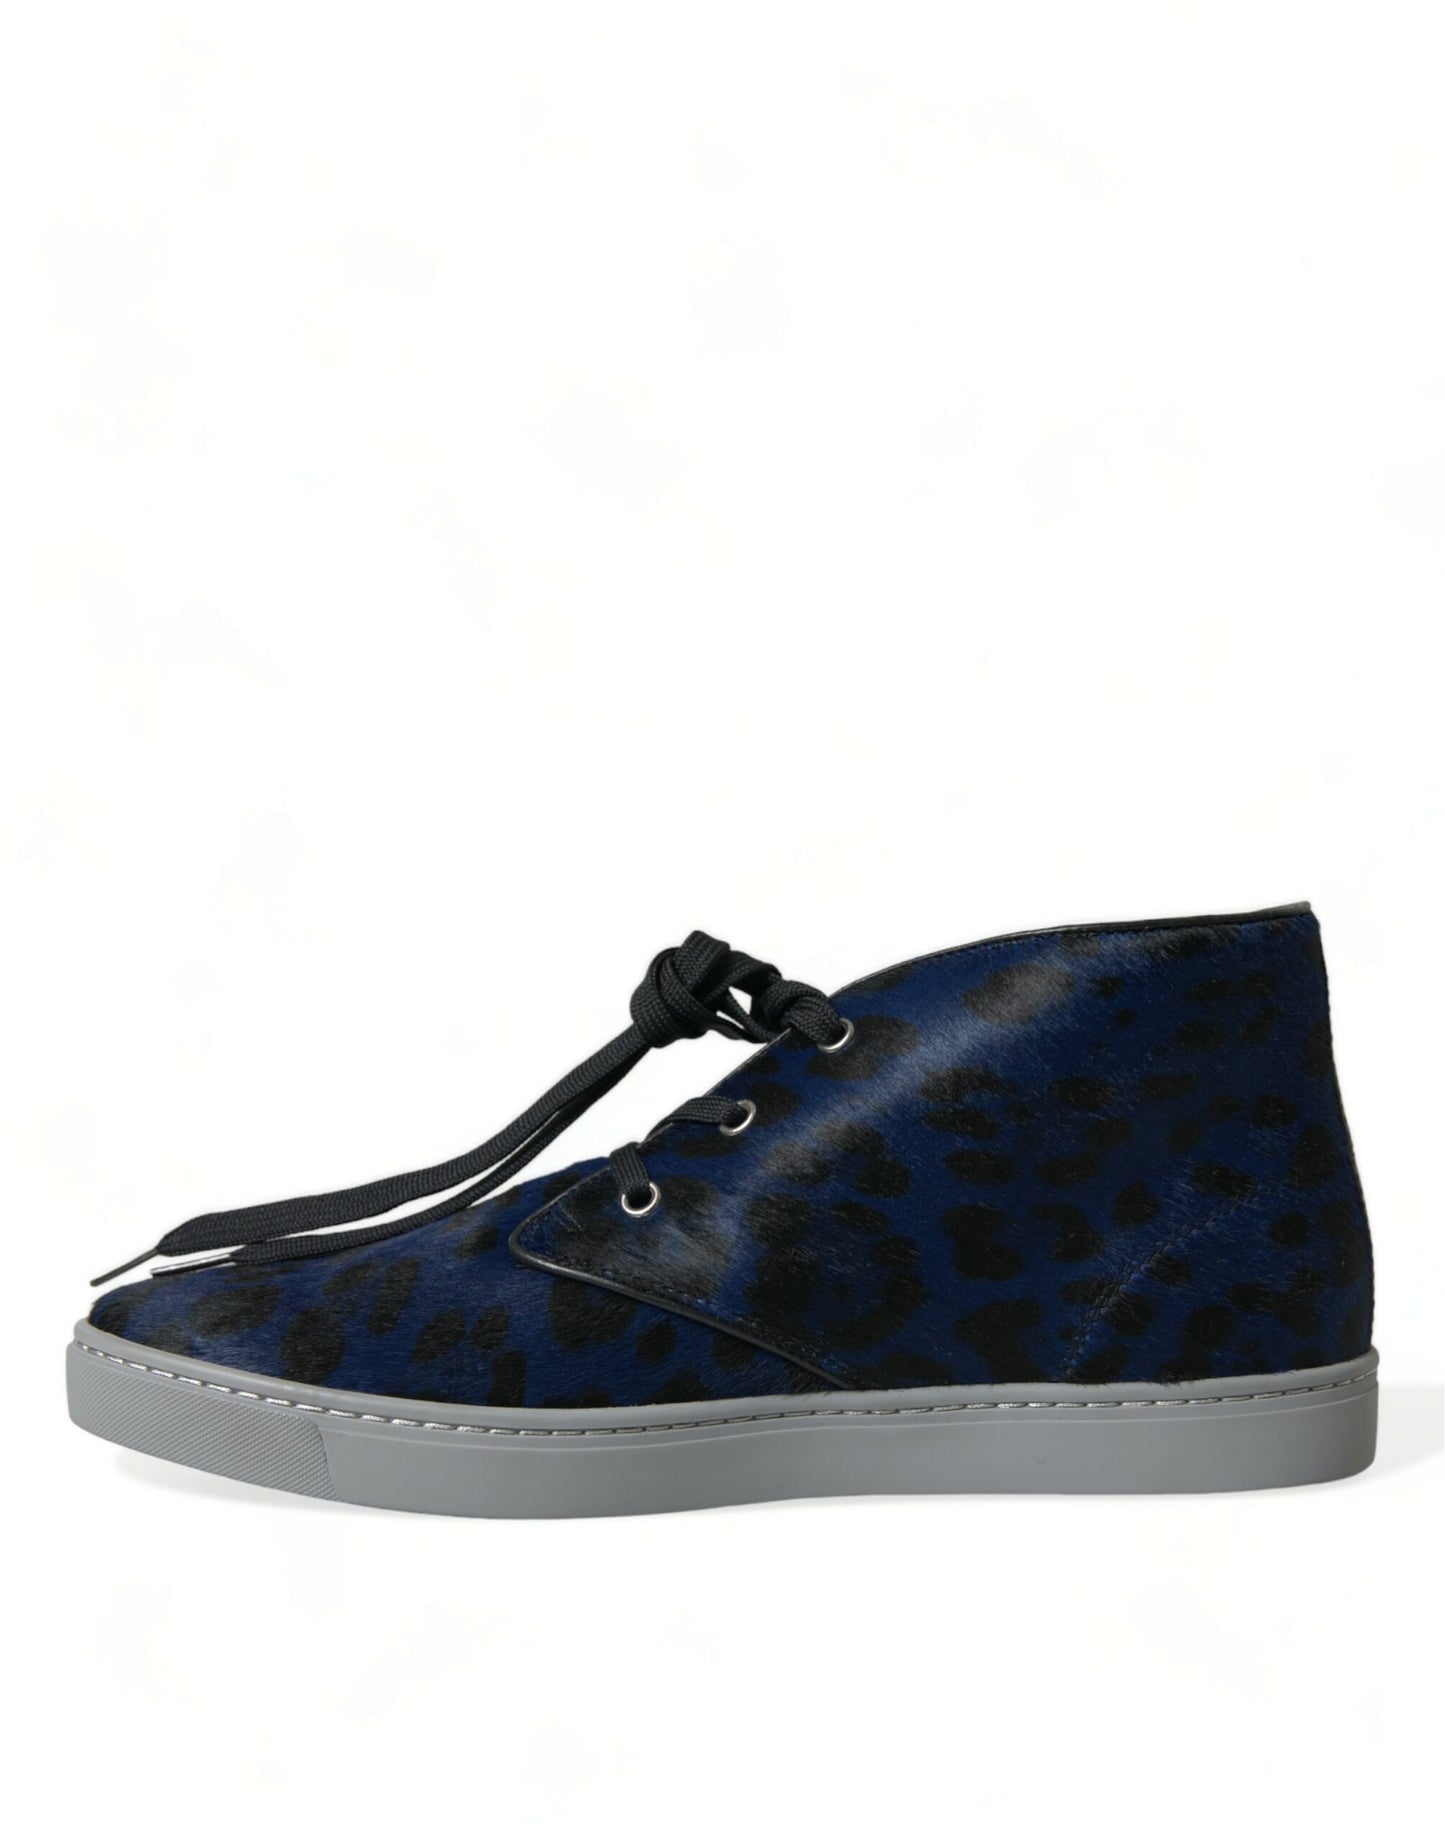 Chic Blue Leopard Print Mid-Top Sneakers